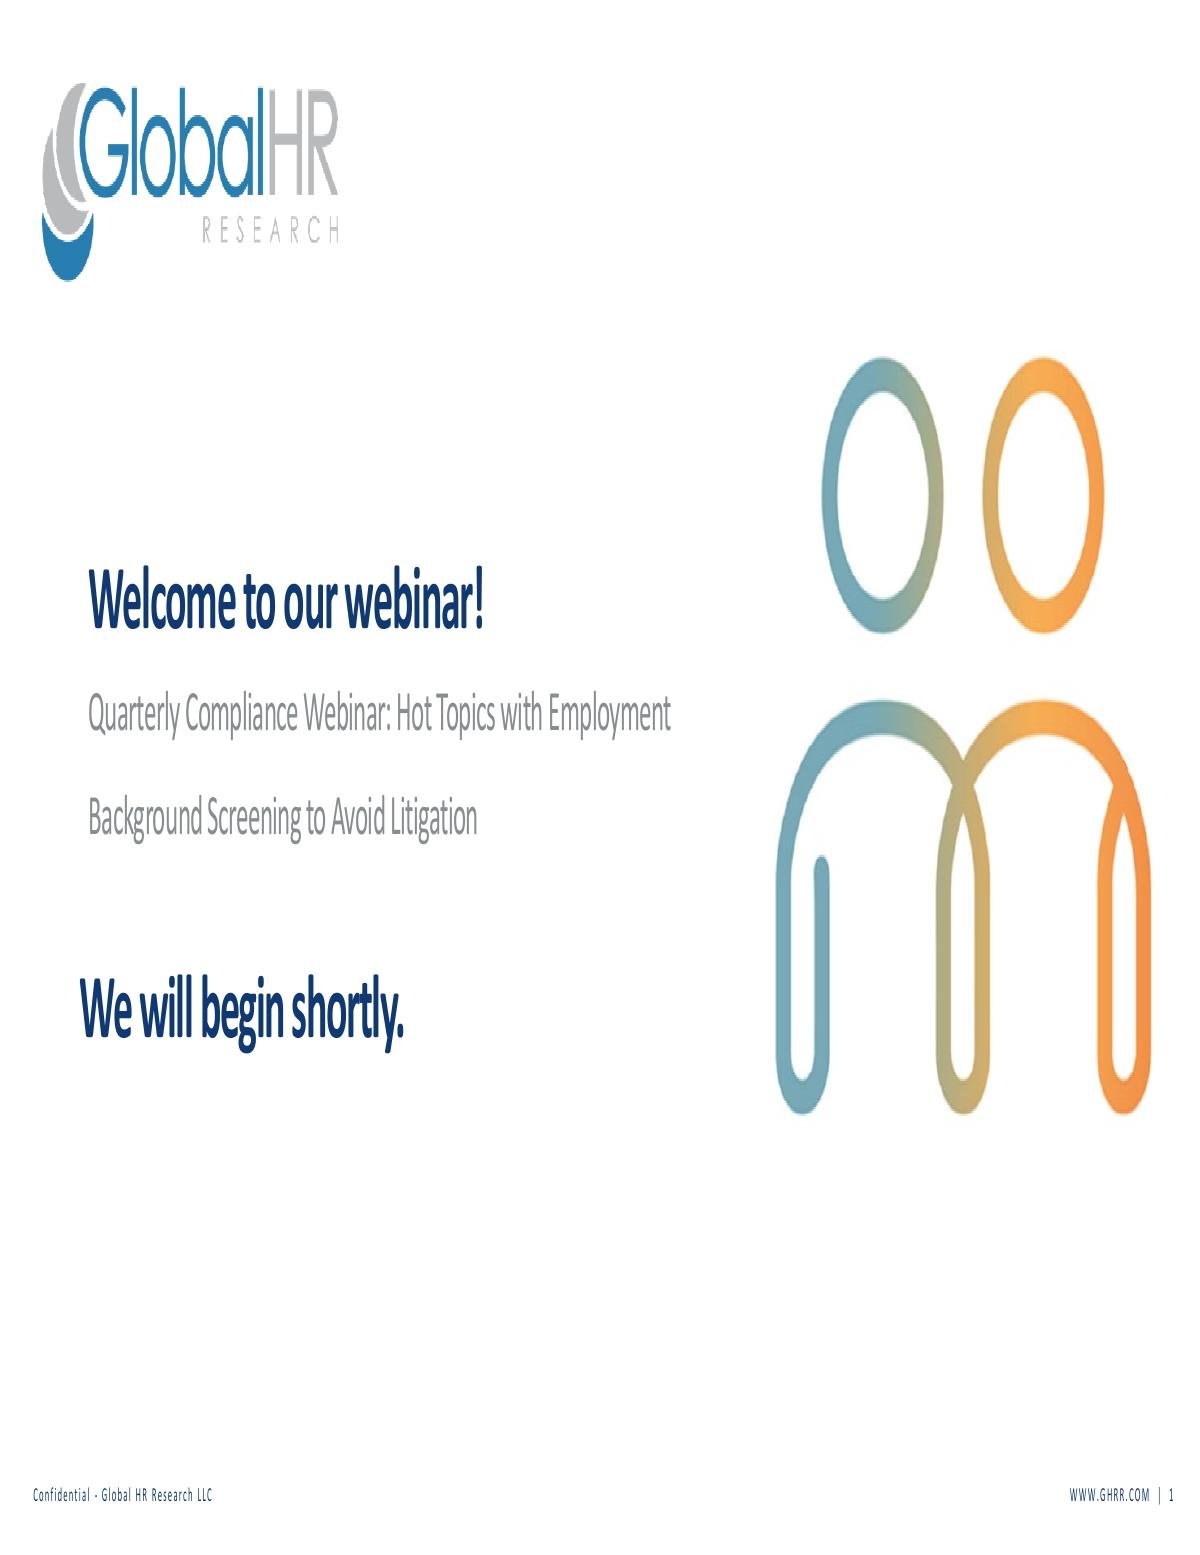 Quarterly Compliance Webinar: Hot Topics with Employment Background Screening to Avoid Litigation